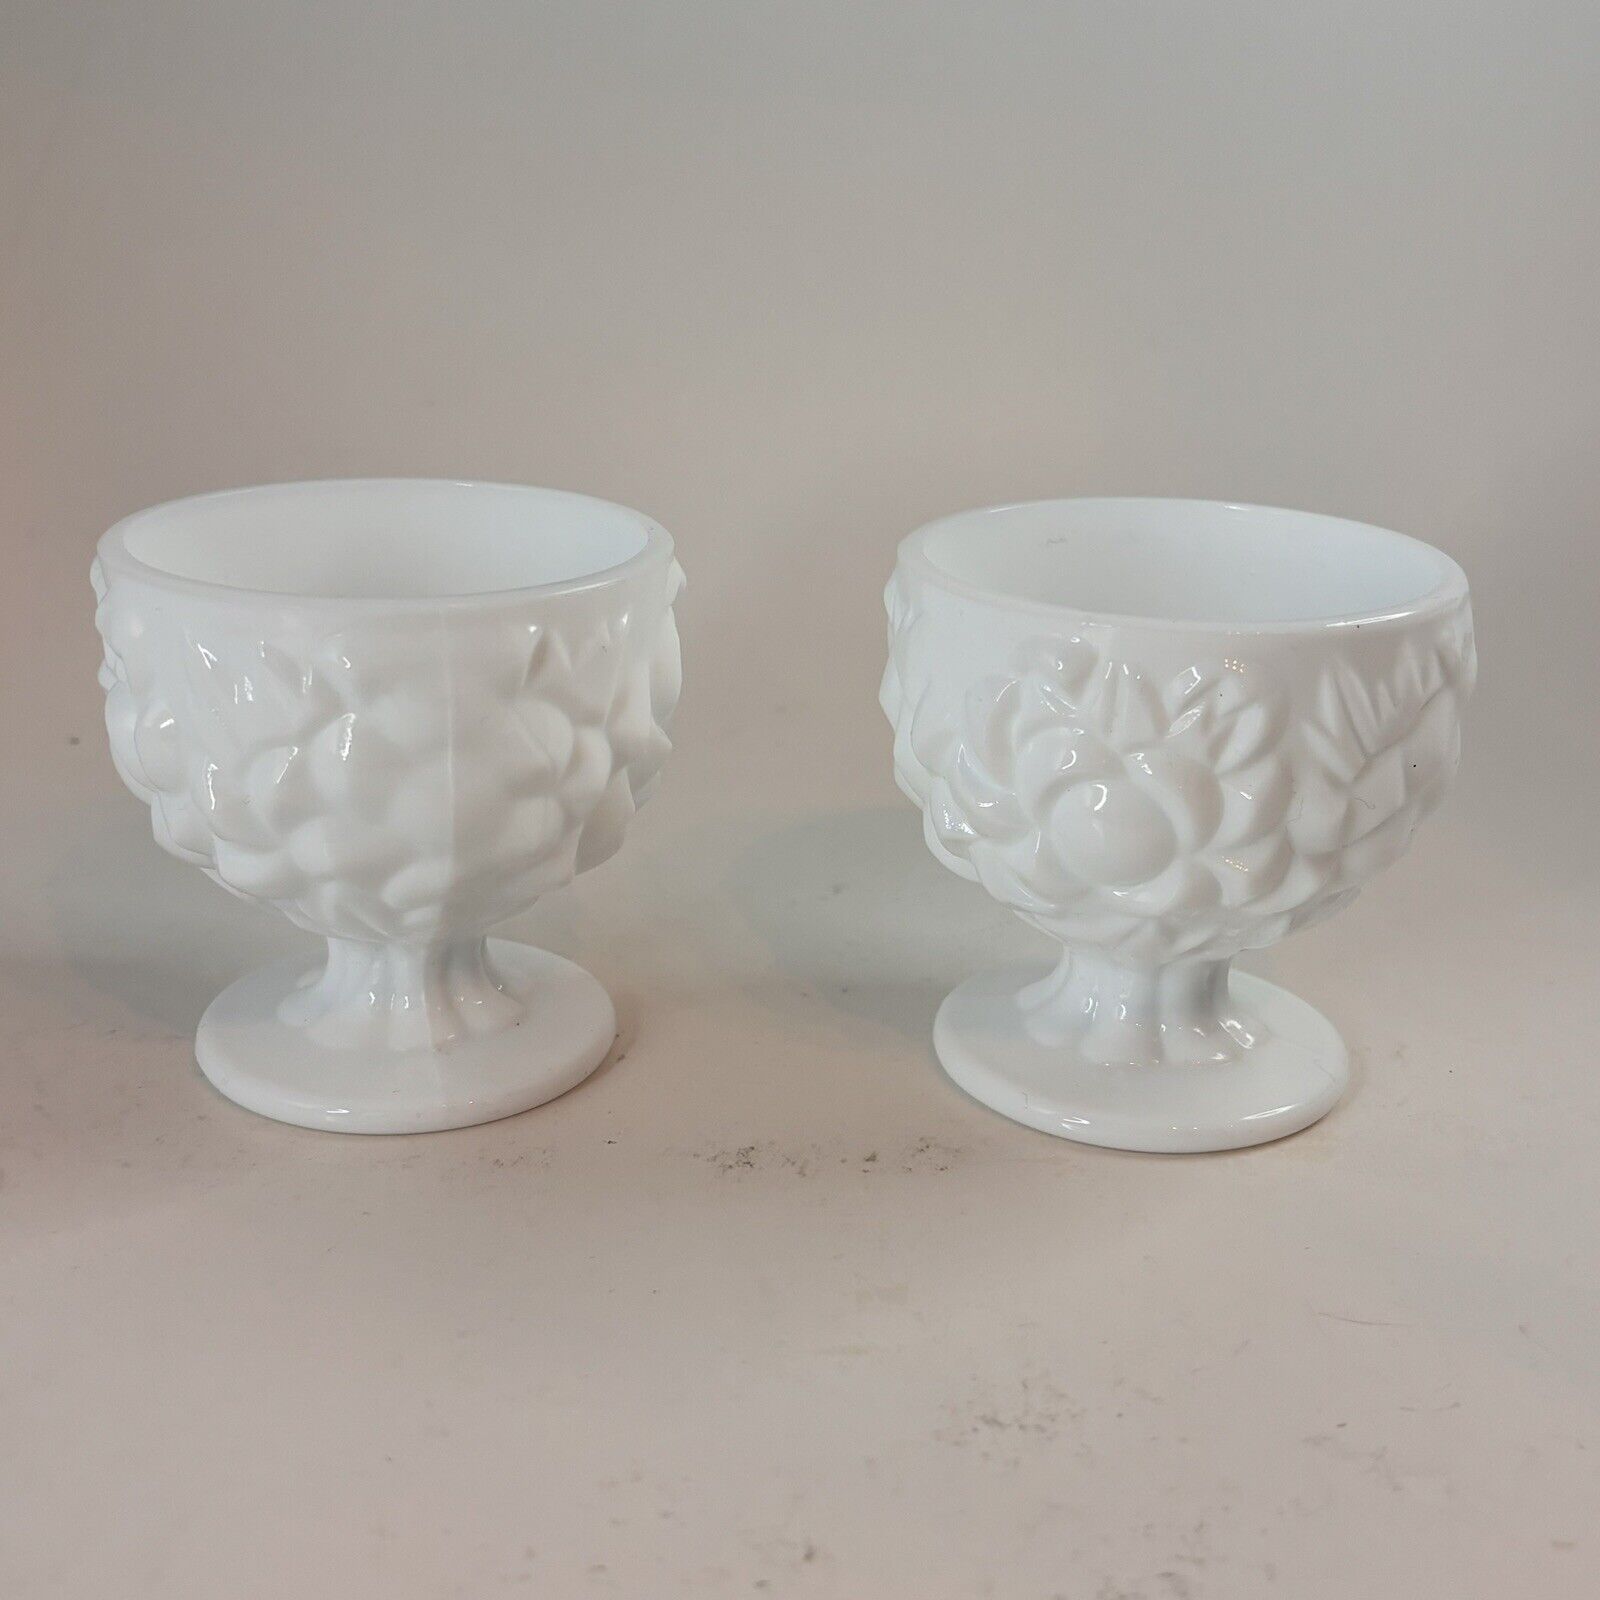 Vintage Set of Milk Glass Candlestick Holders Footed Floral Bouquet